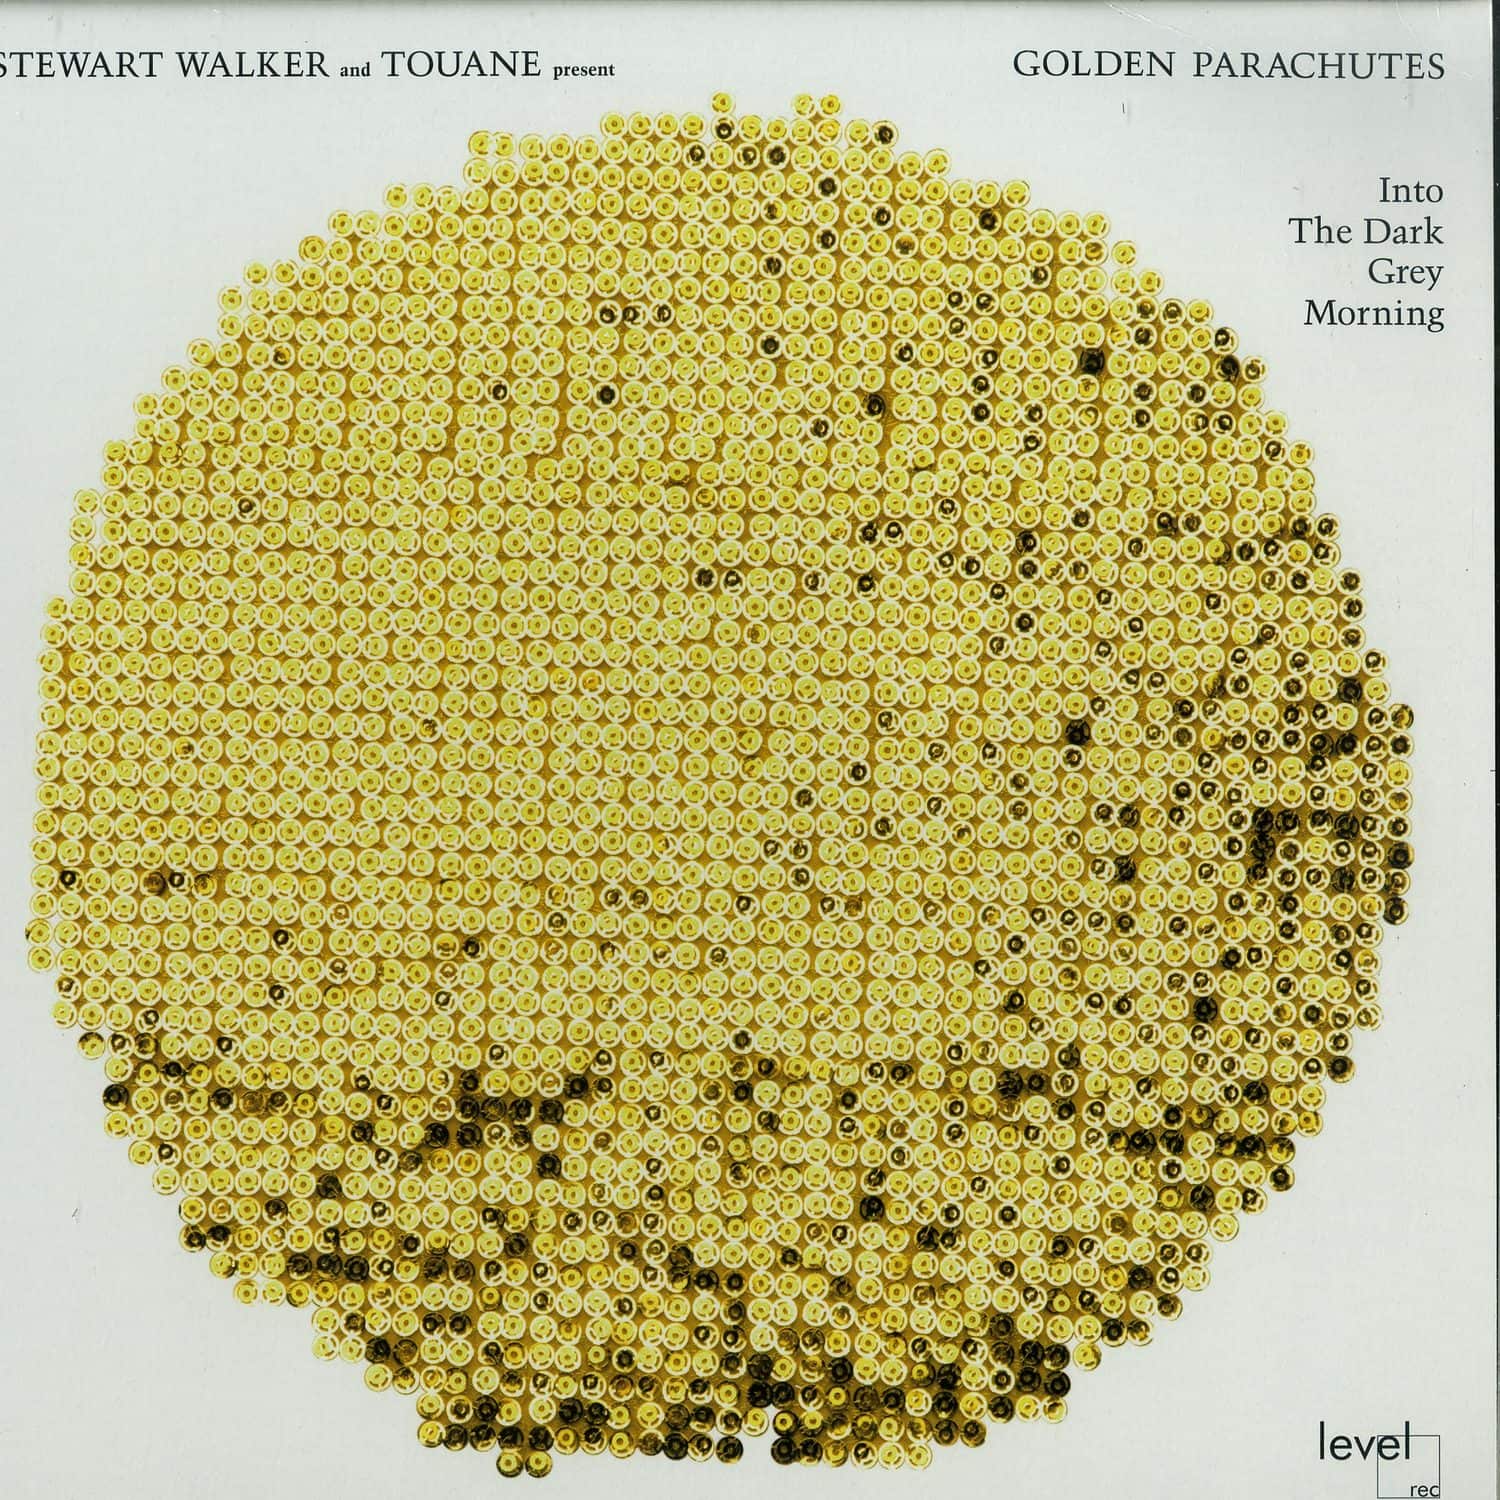 Stewart Walker and Touane presents The Golden Parachutes - INTO THE DARK GREY MORNING 